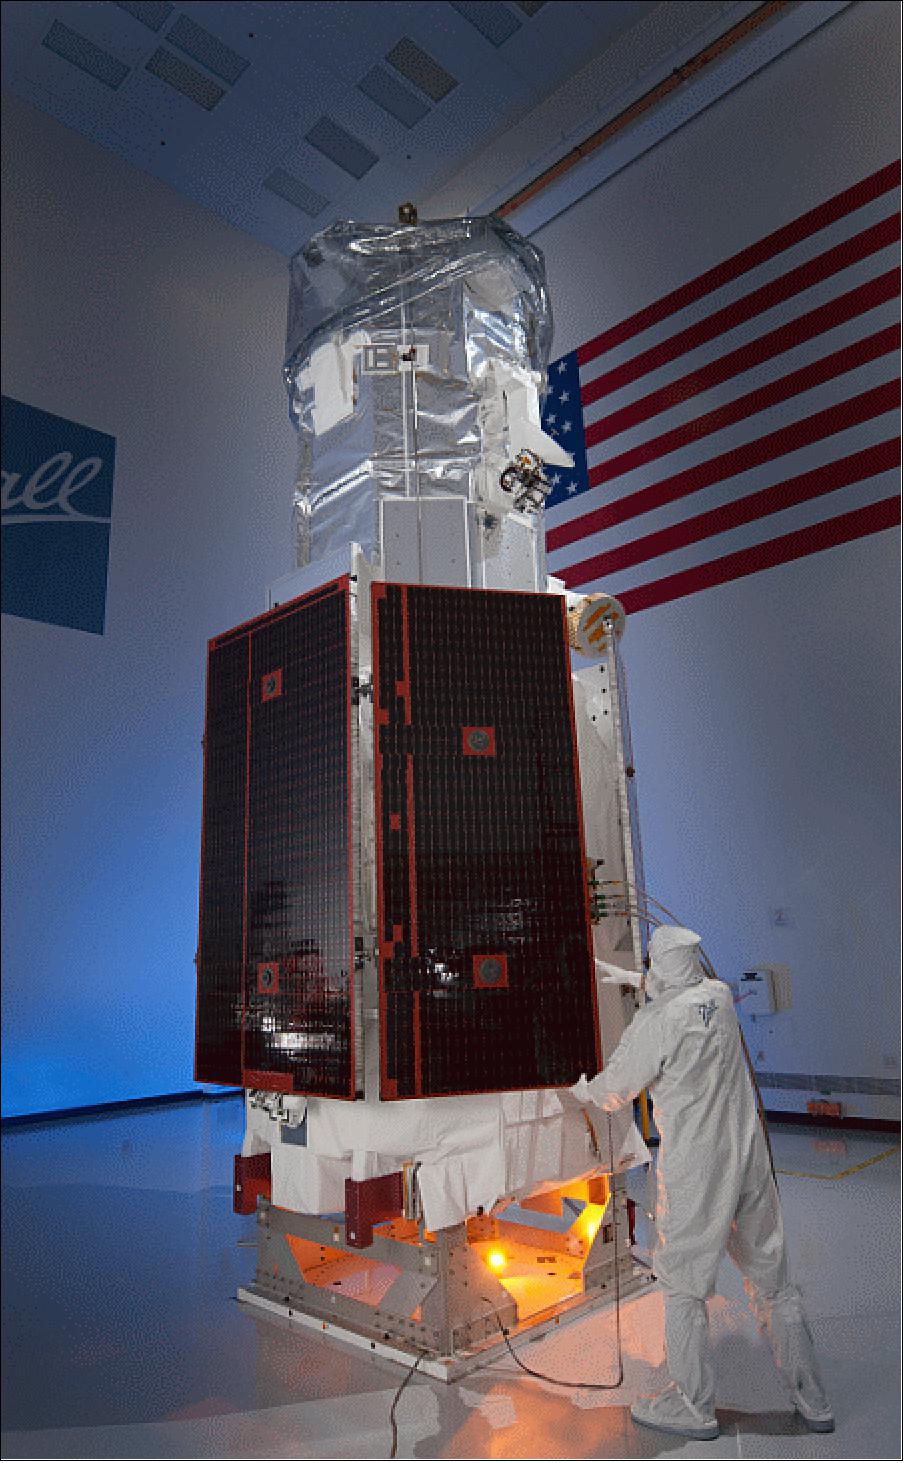 Figure 4: Photo of the WorldView-3 spacecraft at BATC prior to being shipped to VAFB, CA (image credit: BATC)